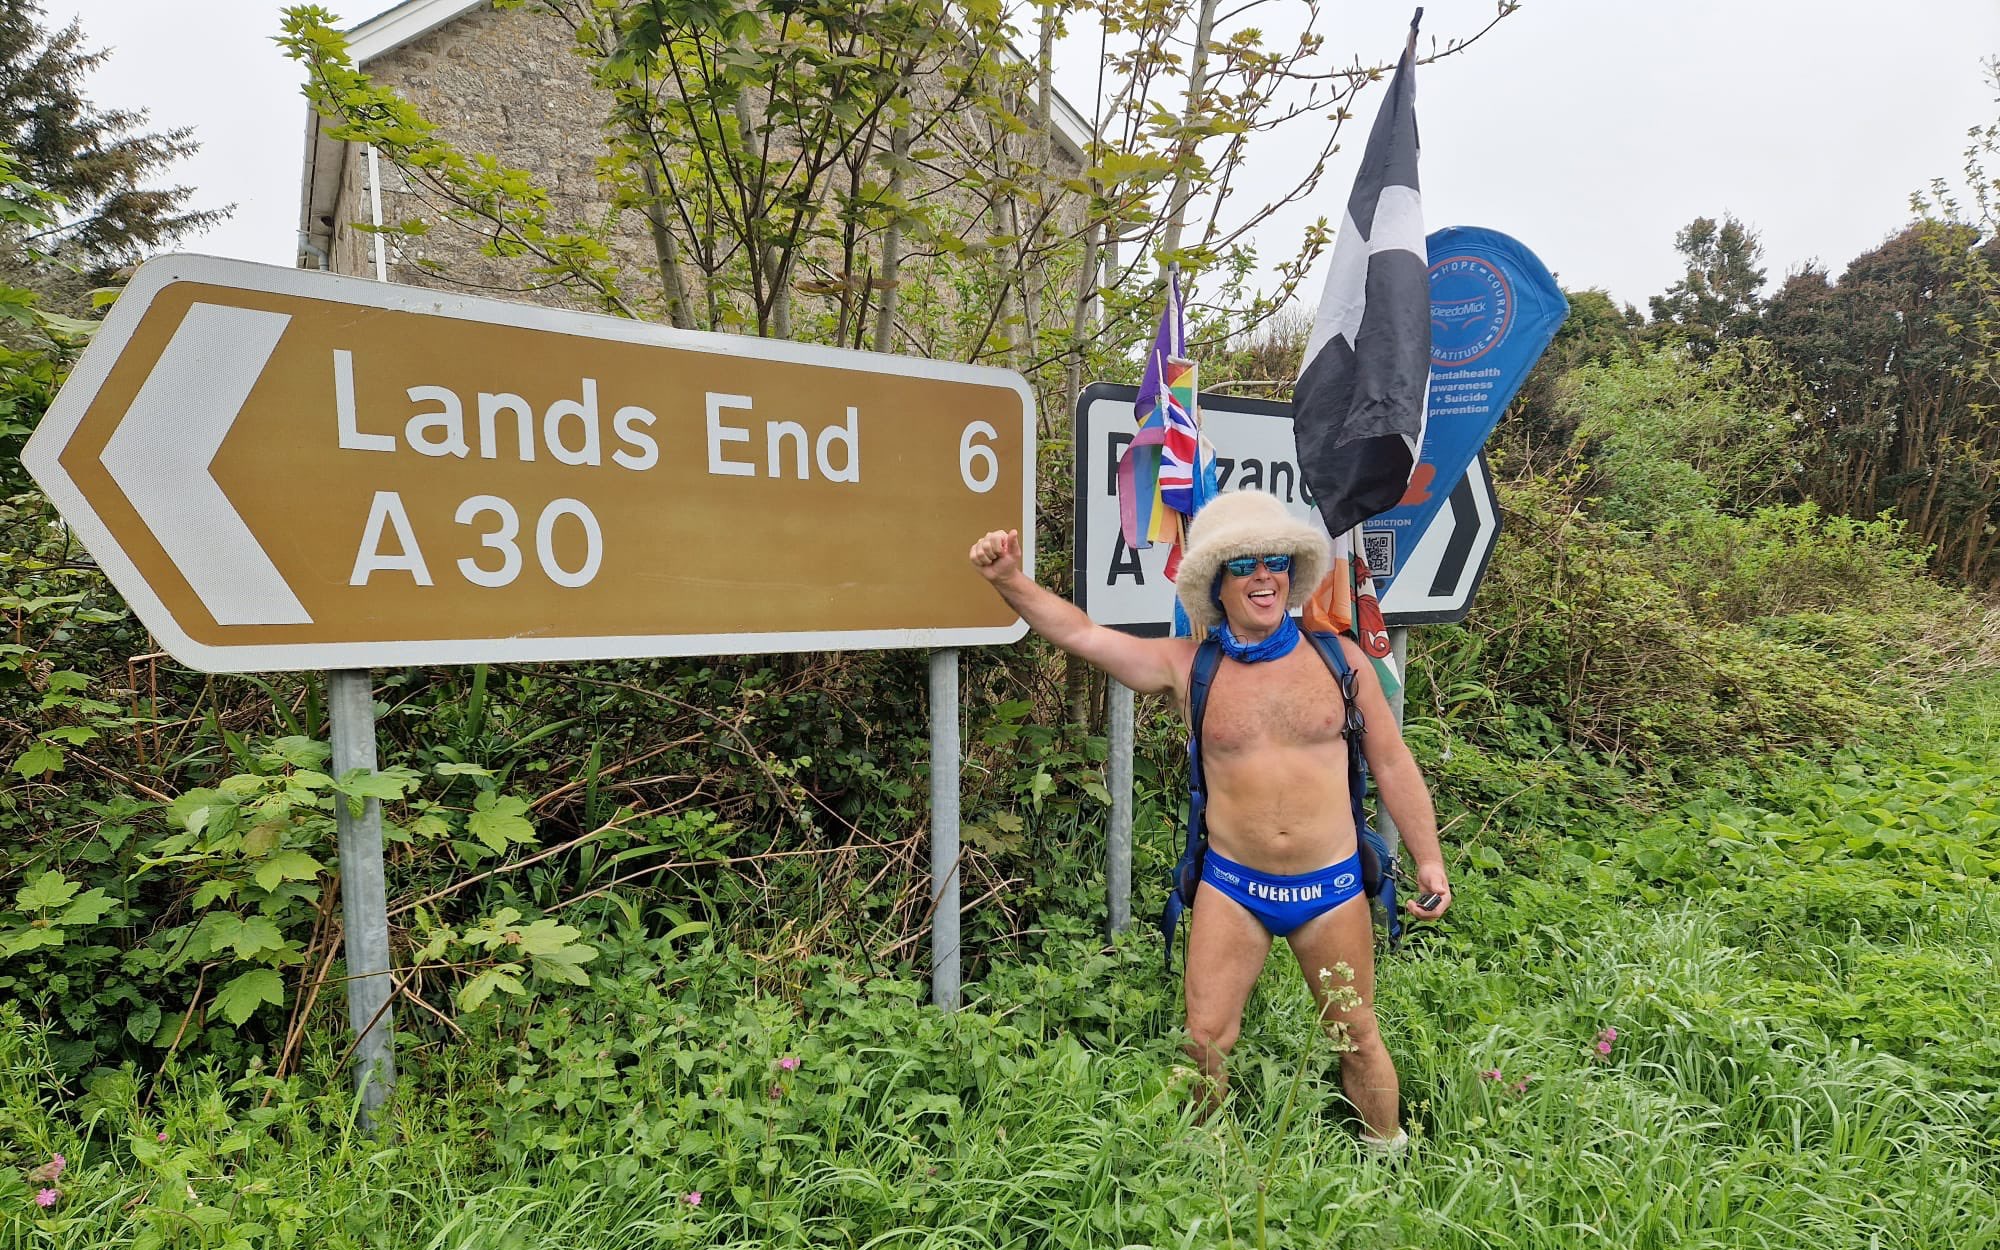 Speedo Mick completes Land's End to John O'Groats